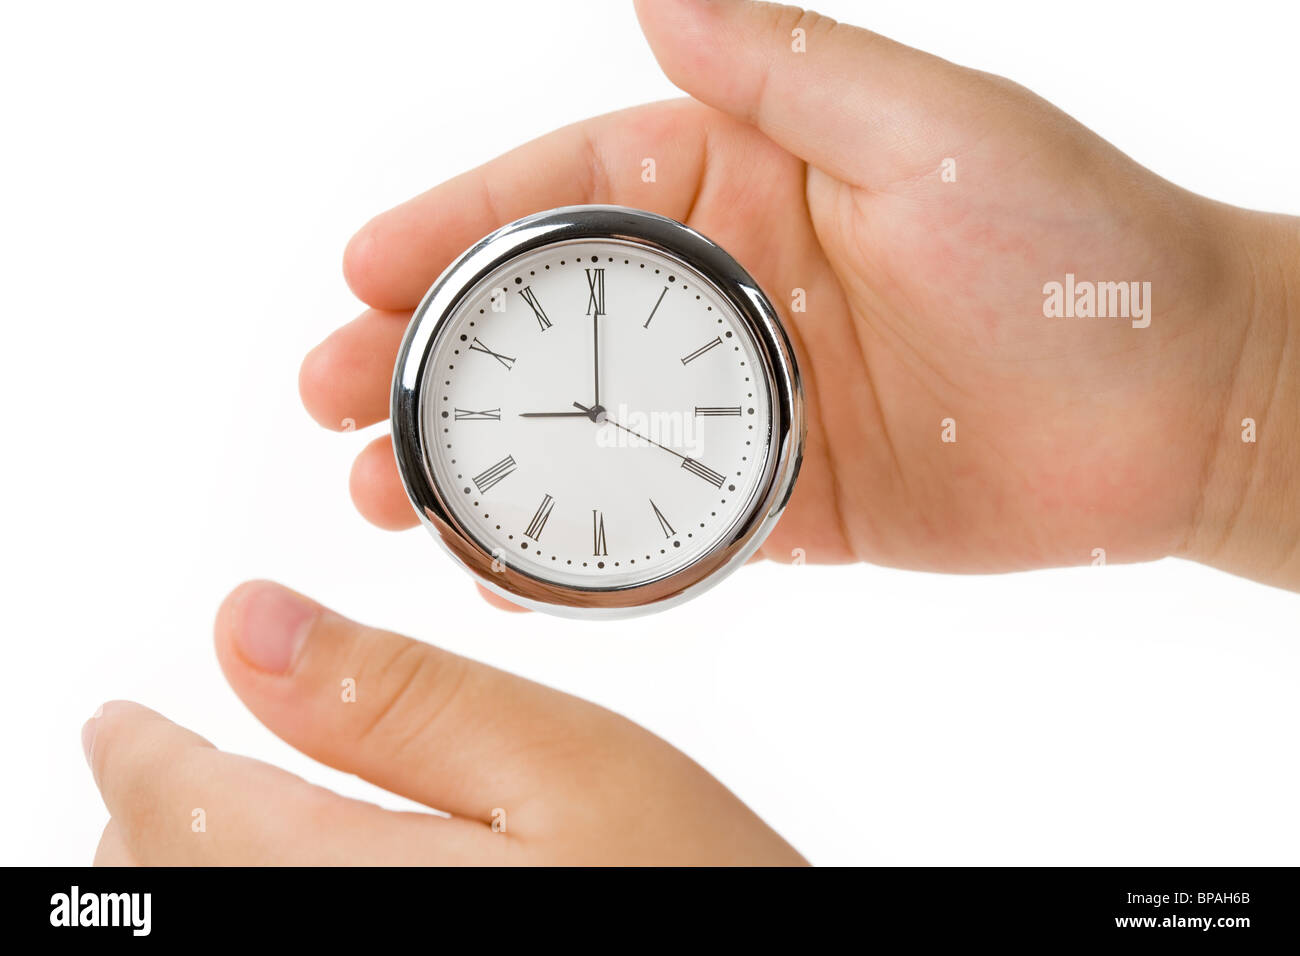 Clock face and finger, concept of Time Control and Balance Stock Photo